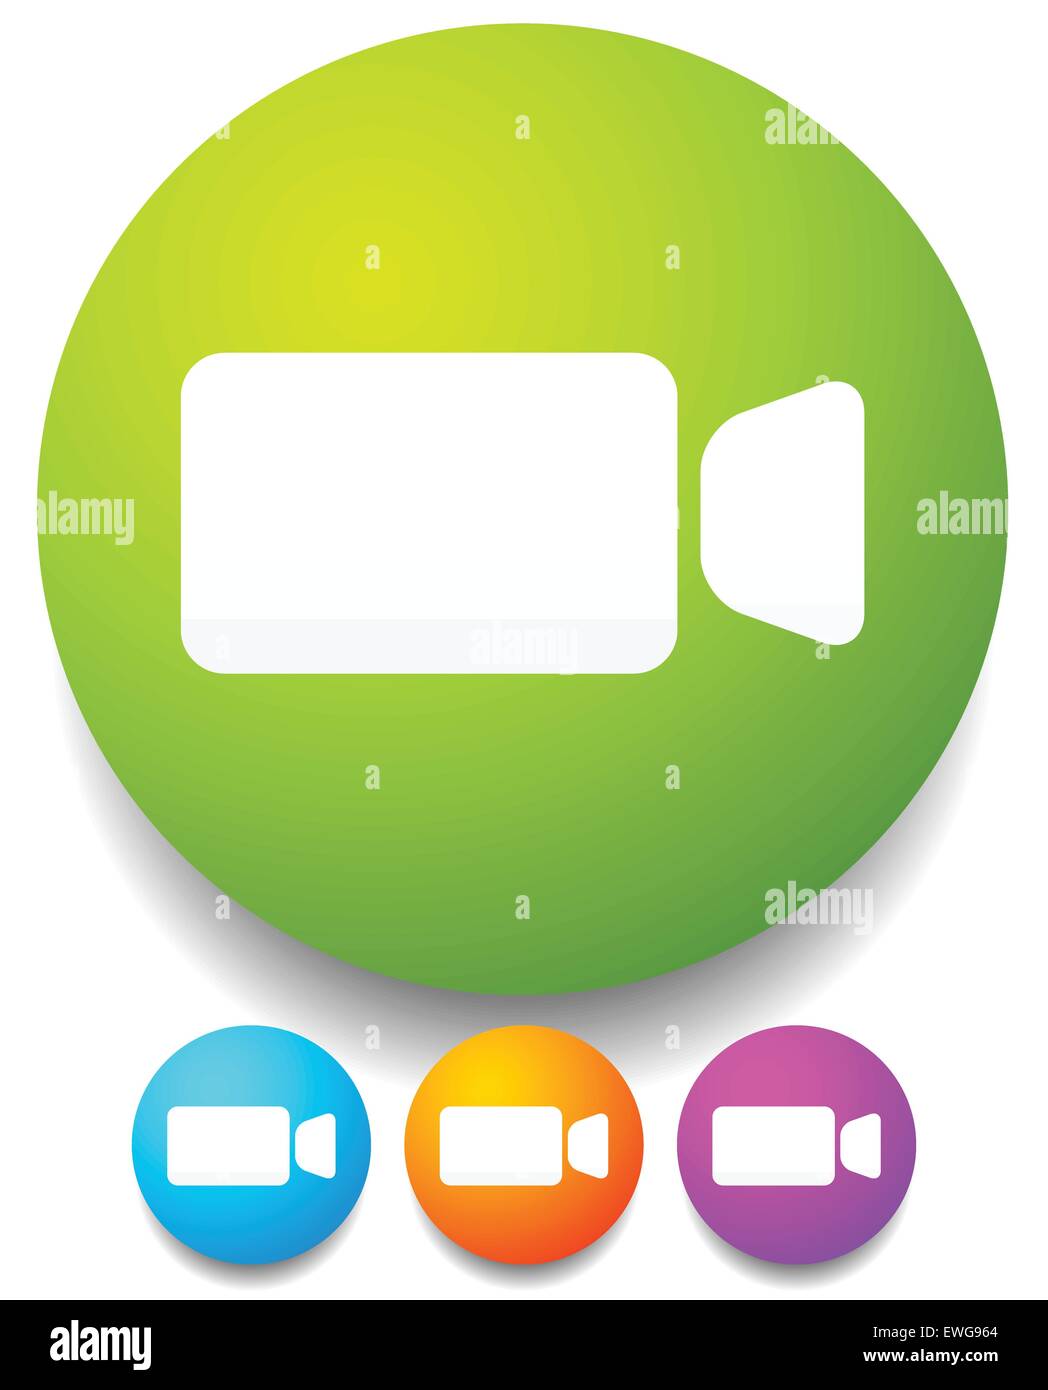 Round icon with small, compact video camera, handycam symbol Icon for video, multimedia, filming concepts. Stock Vector